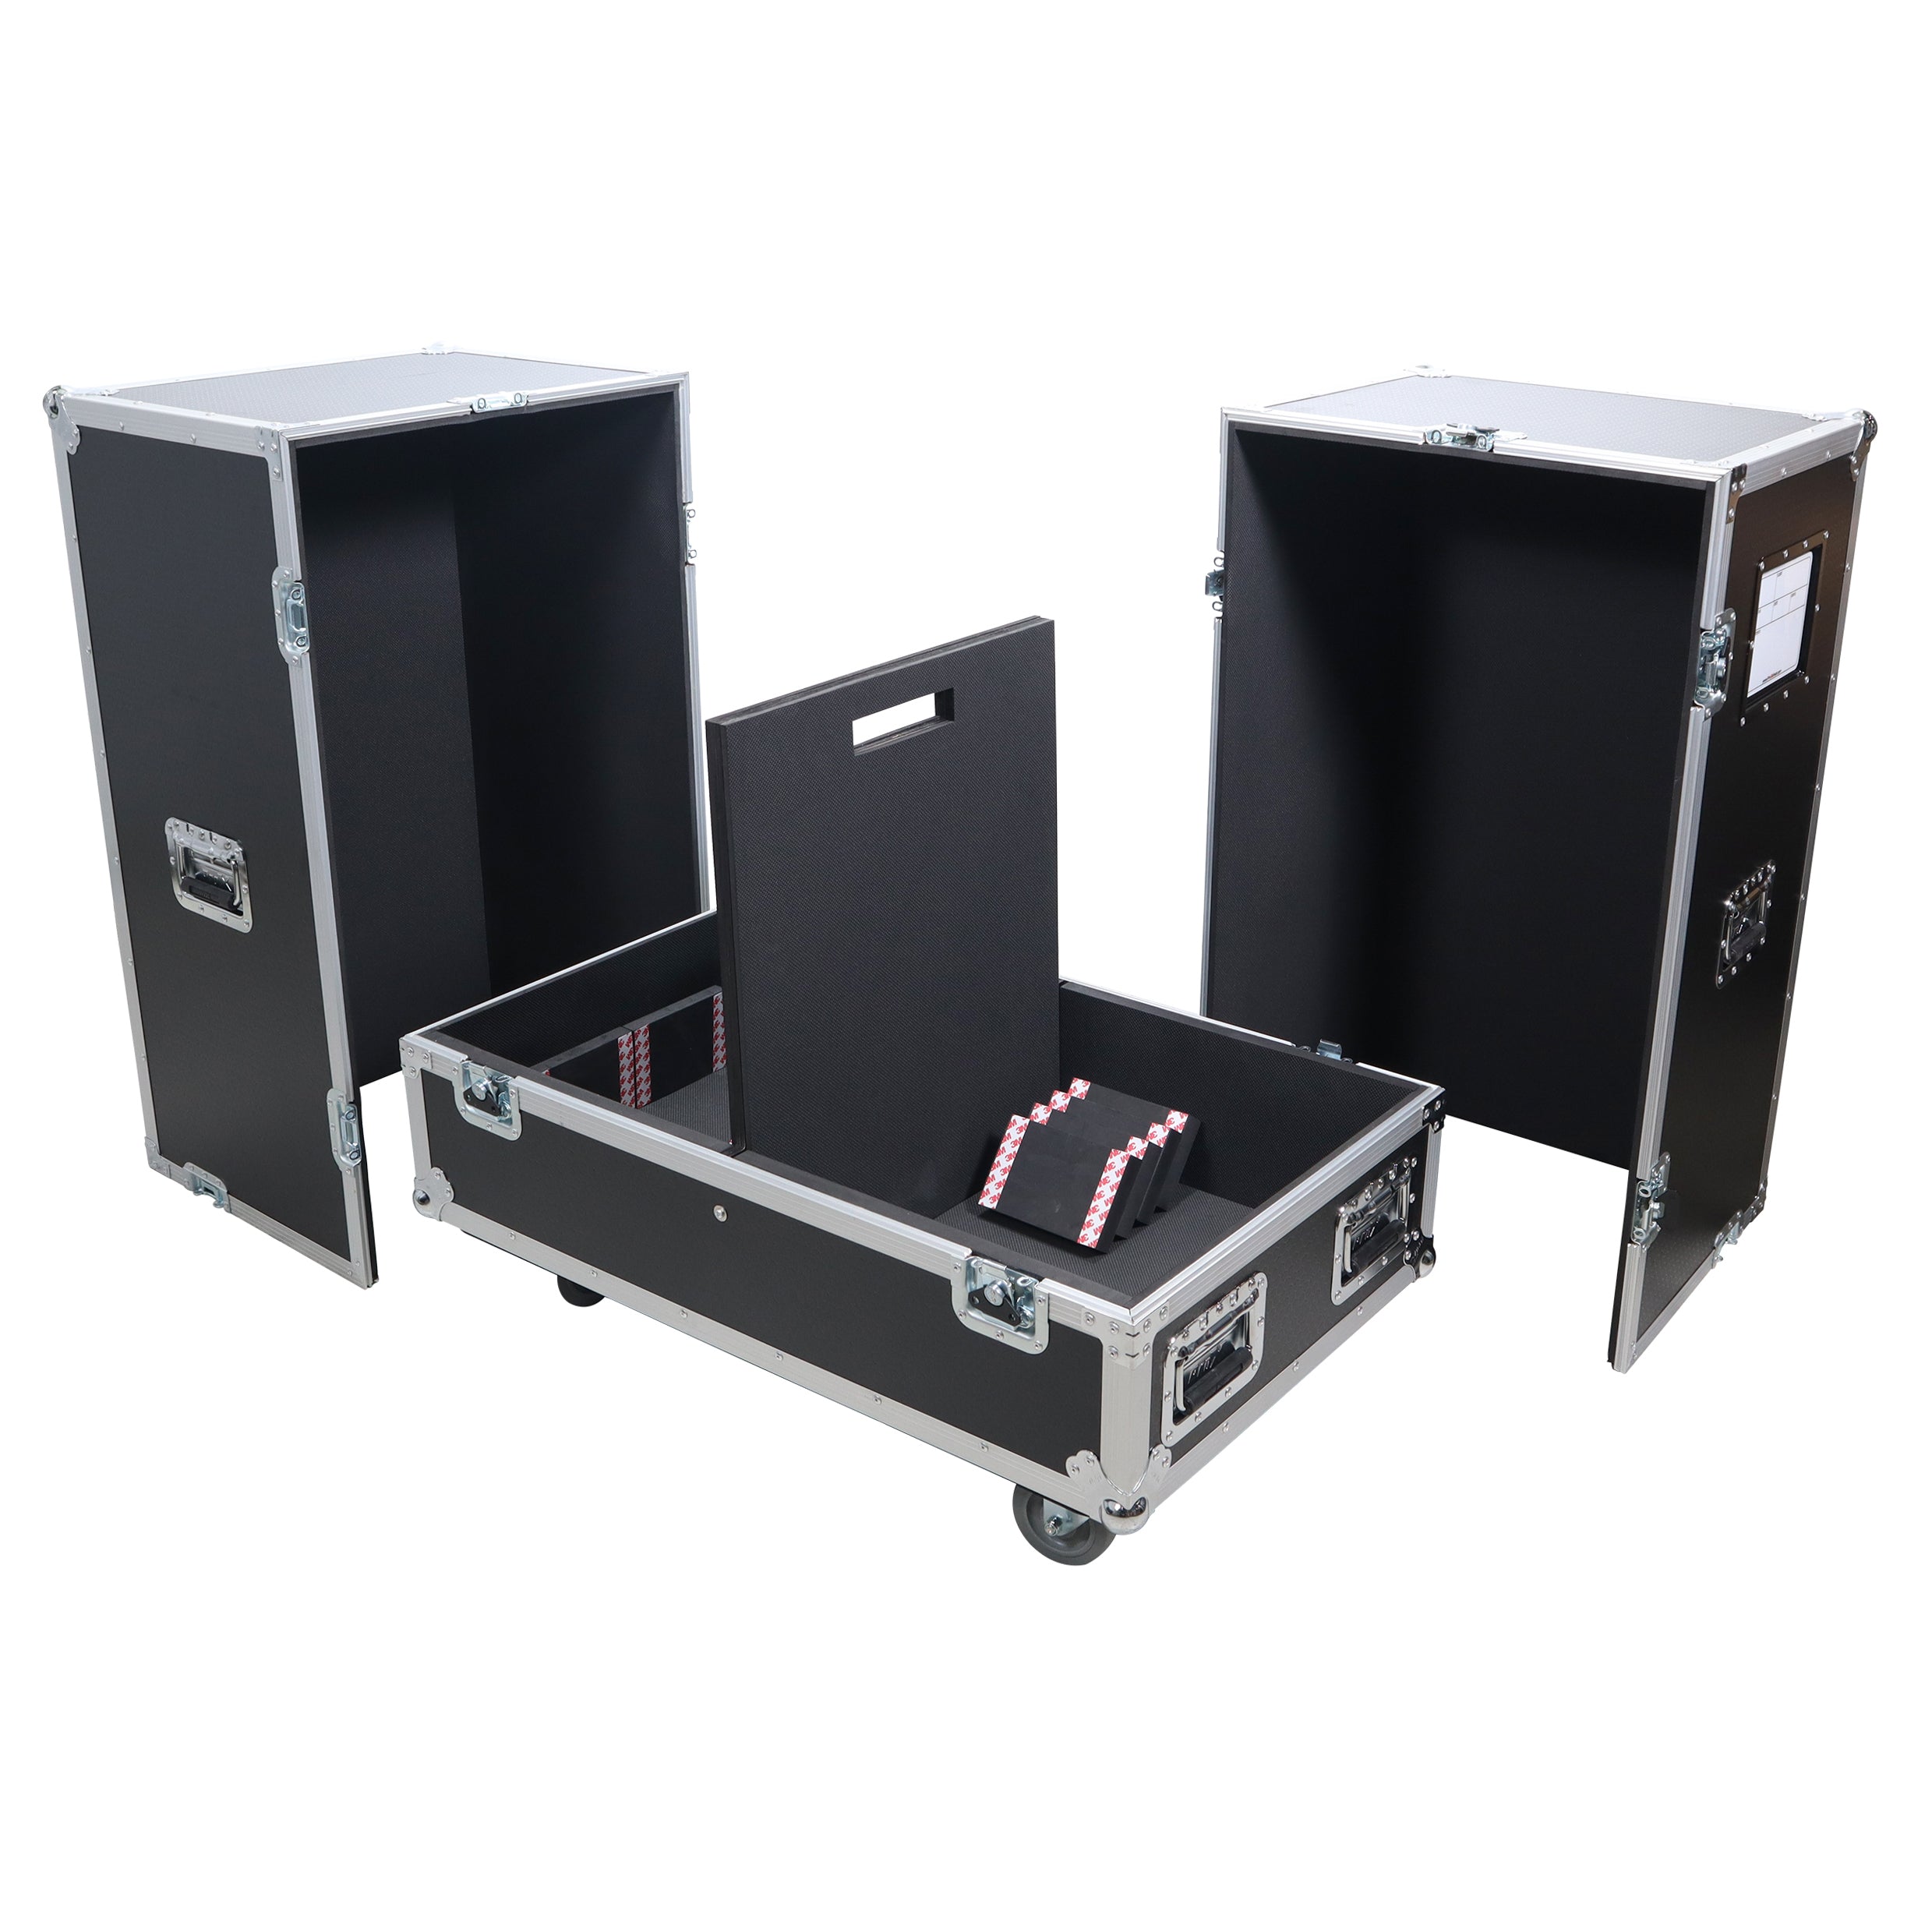 Pro X Universal ATA Dual Speaker Flight Case for 2x QSC KW153 RCF TTL6-A and similar sizes 44x19x17 in. XS-SP2X441917W